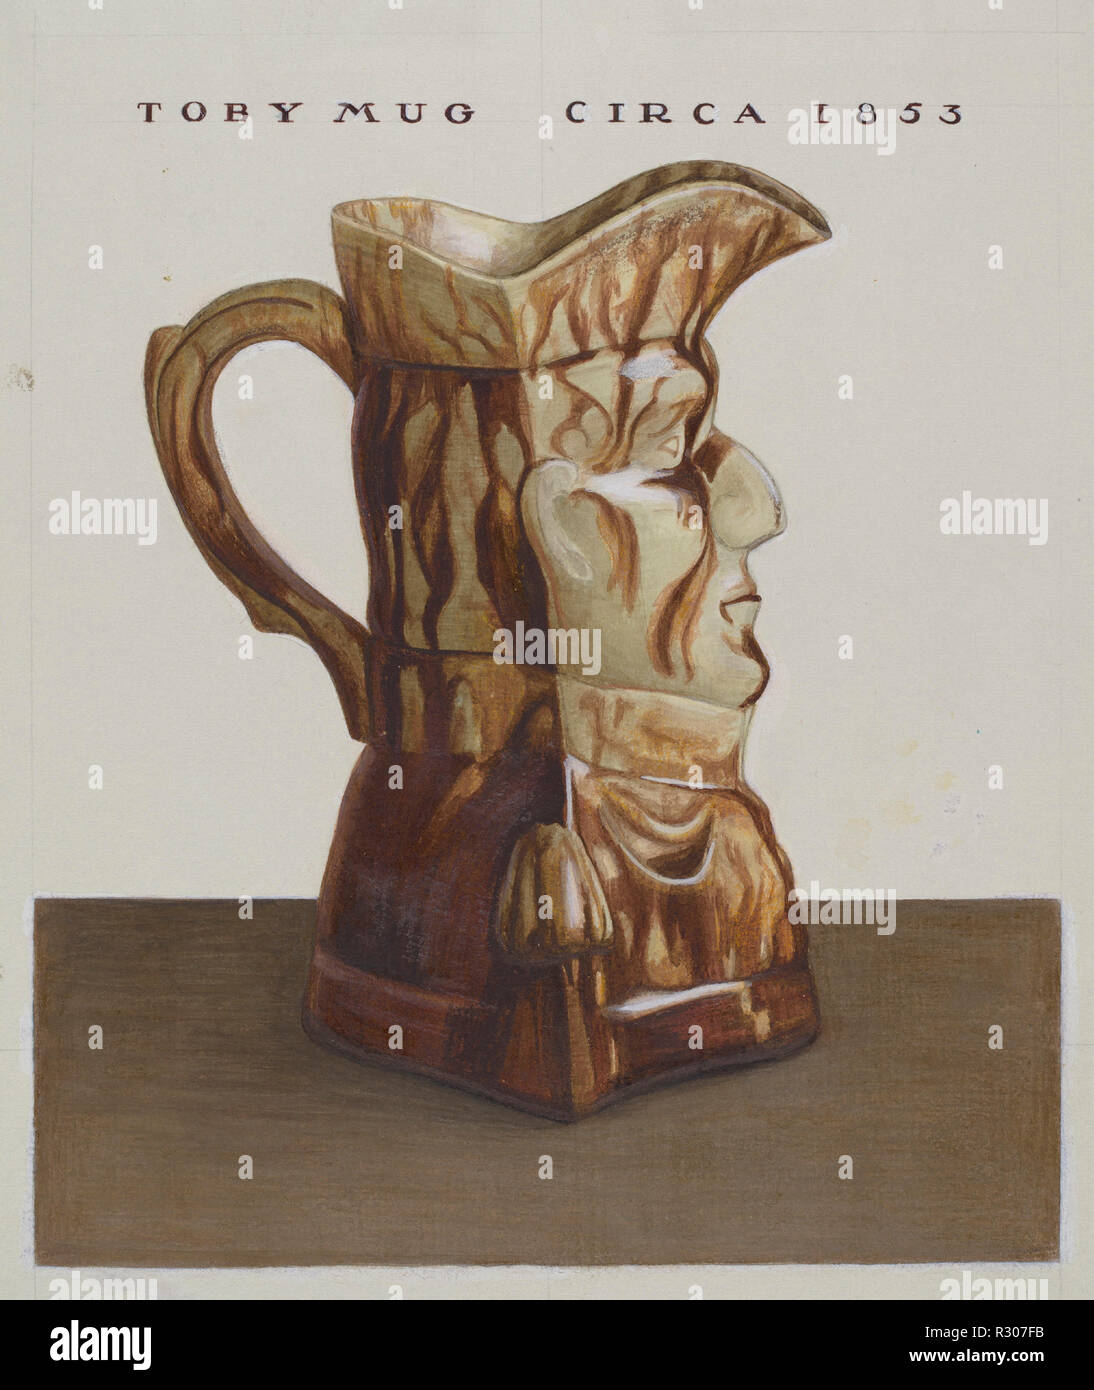 Toby Mug. Dated: c. 1937. Dimensions: overall: 23.2 x 19.7 cm (9 1/8 x 7 3/4 in.)  Original IAD Object: 5 1/2' High  Width varies 2 3/8' to 3 1/2'. Medium: watercolor, graphite, colored pencil, and gouache on paper. Museum: National Gallery of Art, Washington DC. Author: Cleo Lovett. Stock Photo